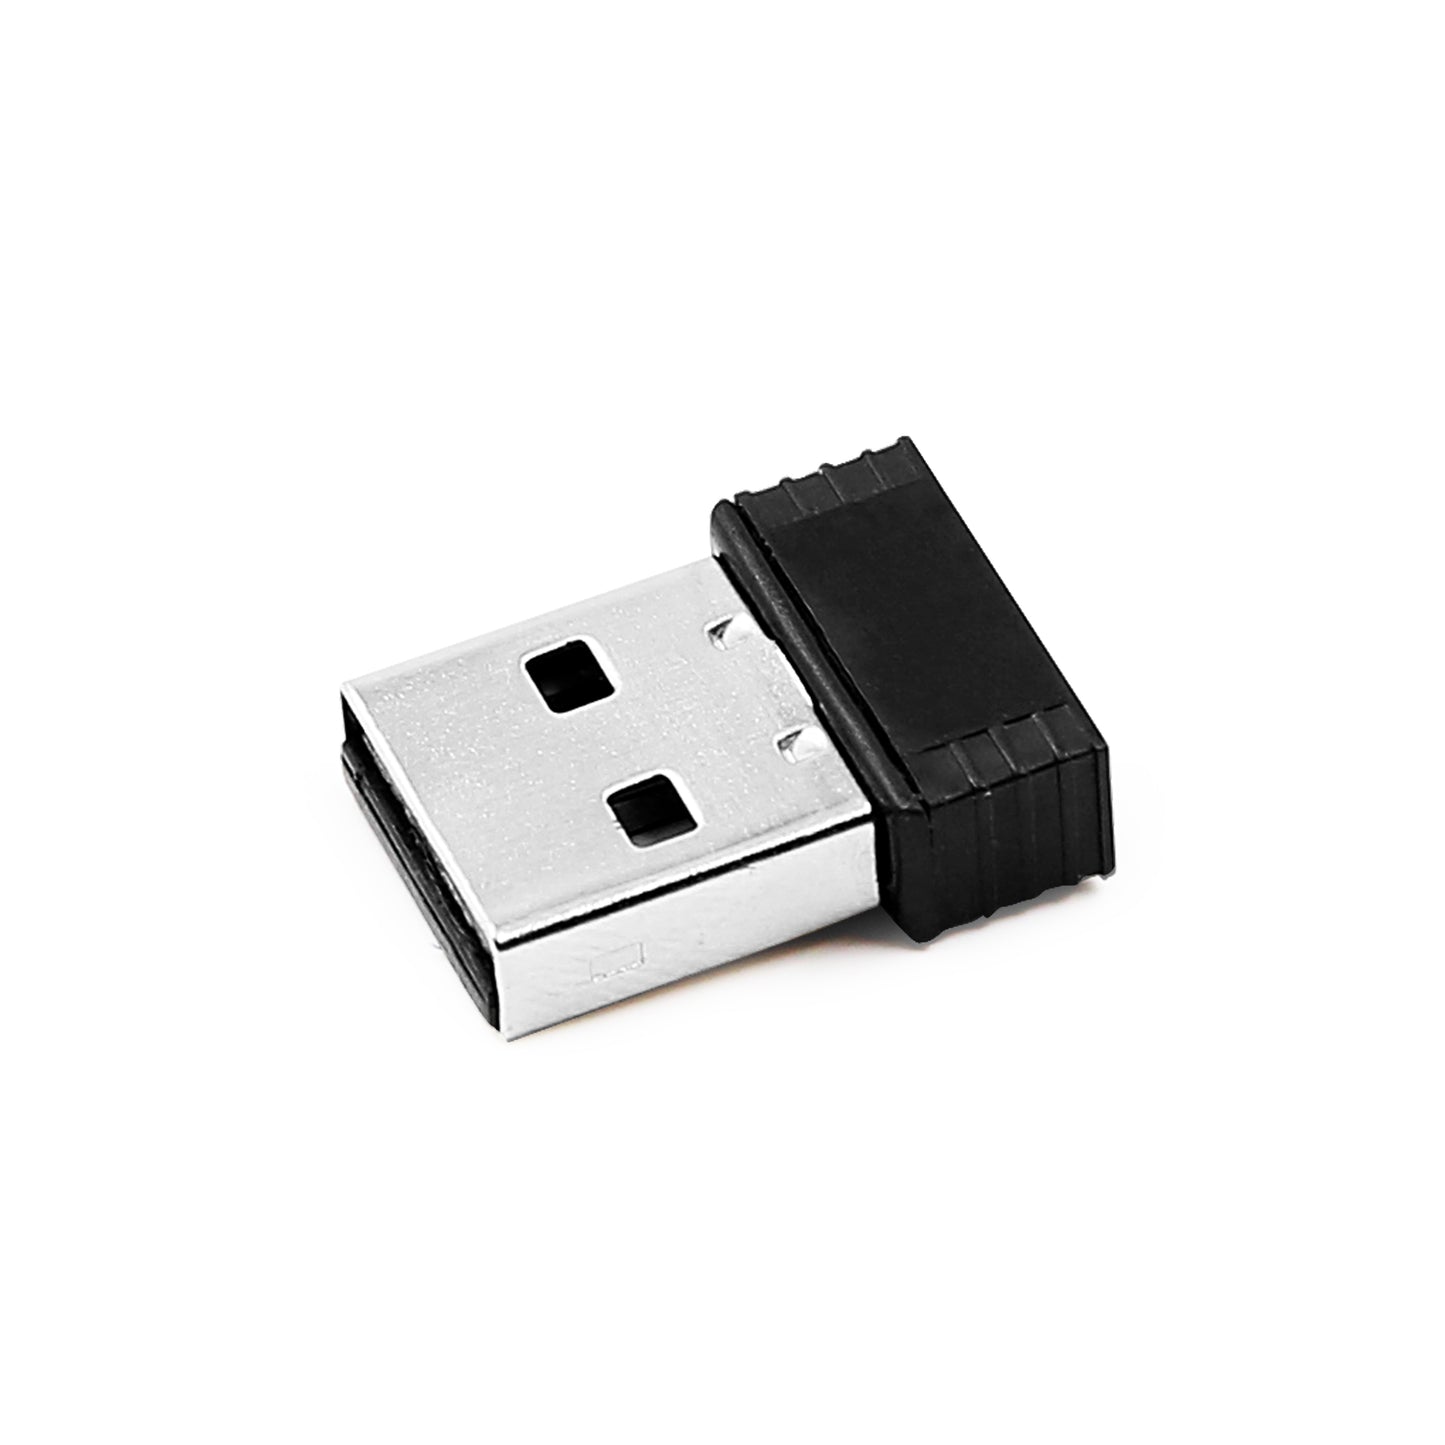 TEEMI 2.4G USB Adapter Receiver for TMCT-07 and inateck BCST-20 Scanner